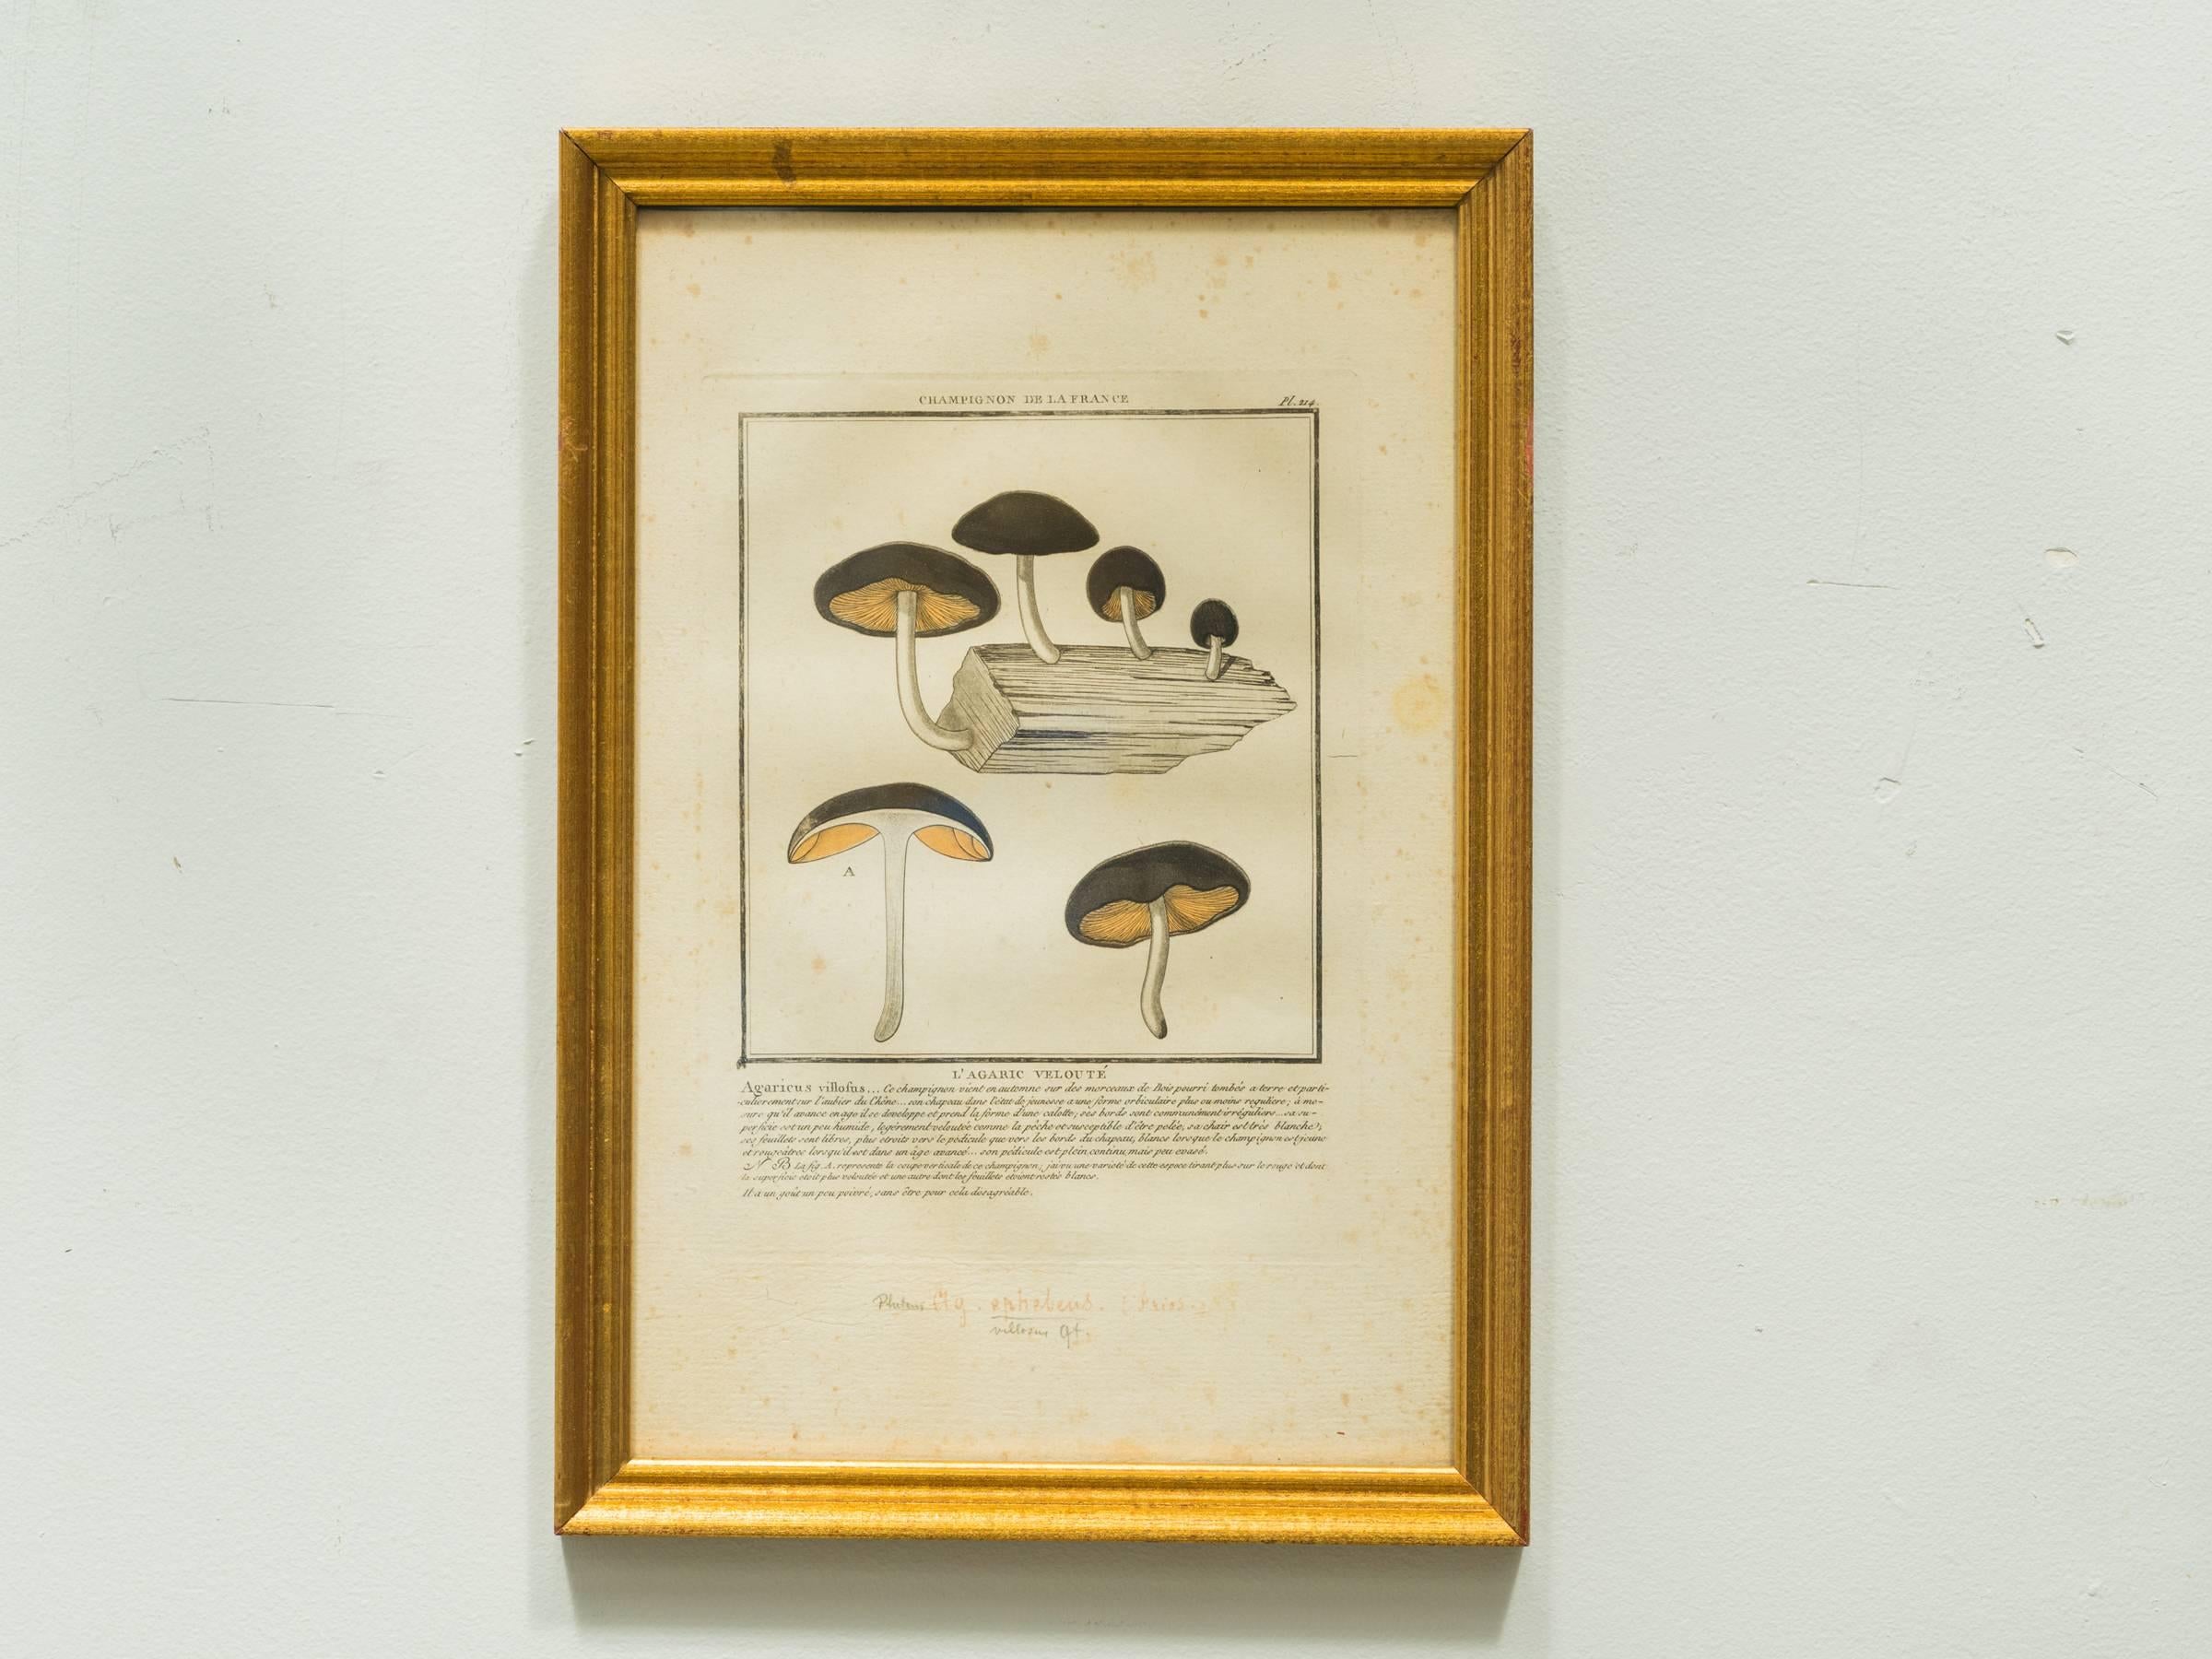 27 framed French mushroom prints from the 1920s. Some foxing on prints.